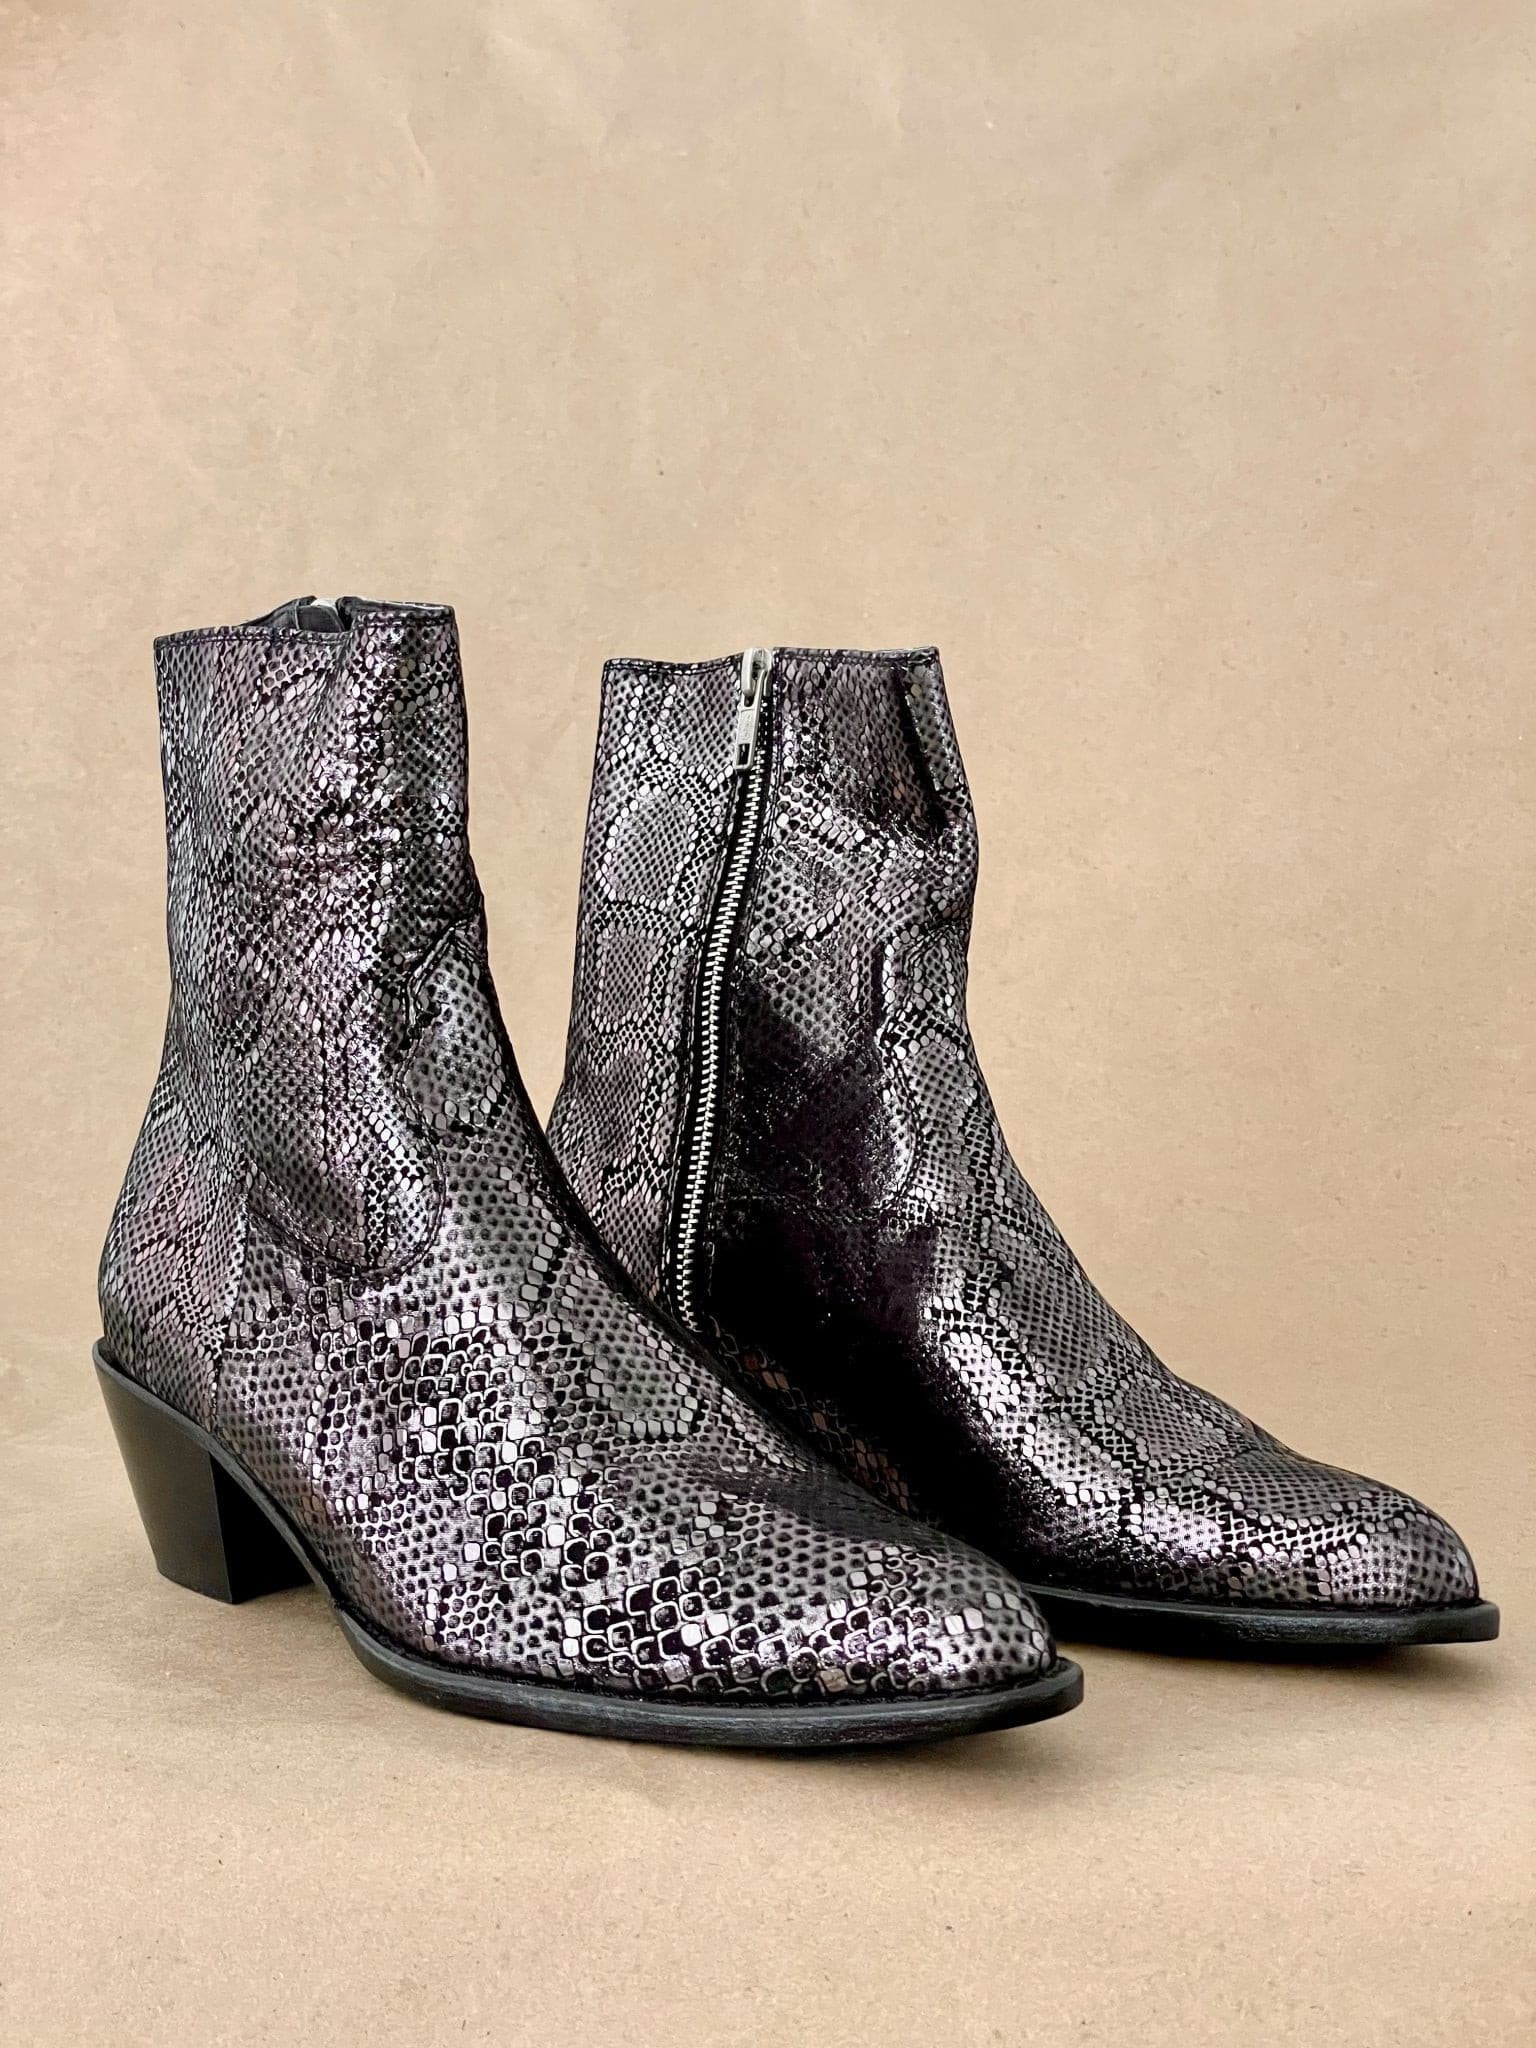 Putte Turbulens Tage en risiko Silver Snake Ankle Boots - 39, hand made - MOMO NEW YORK - sustai...